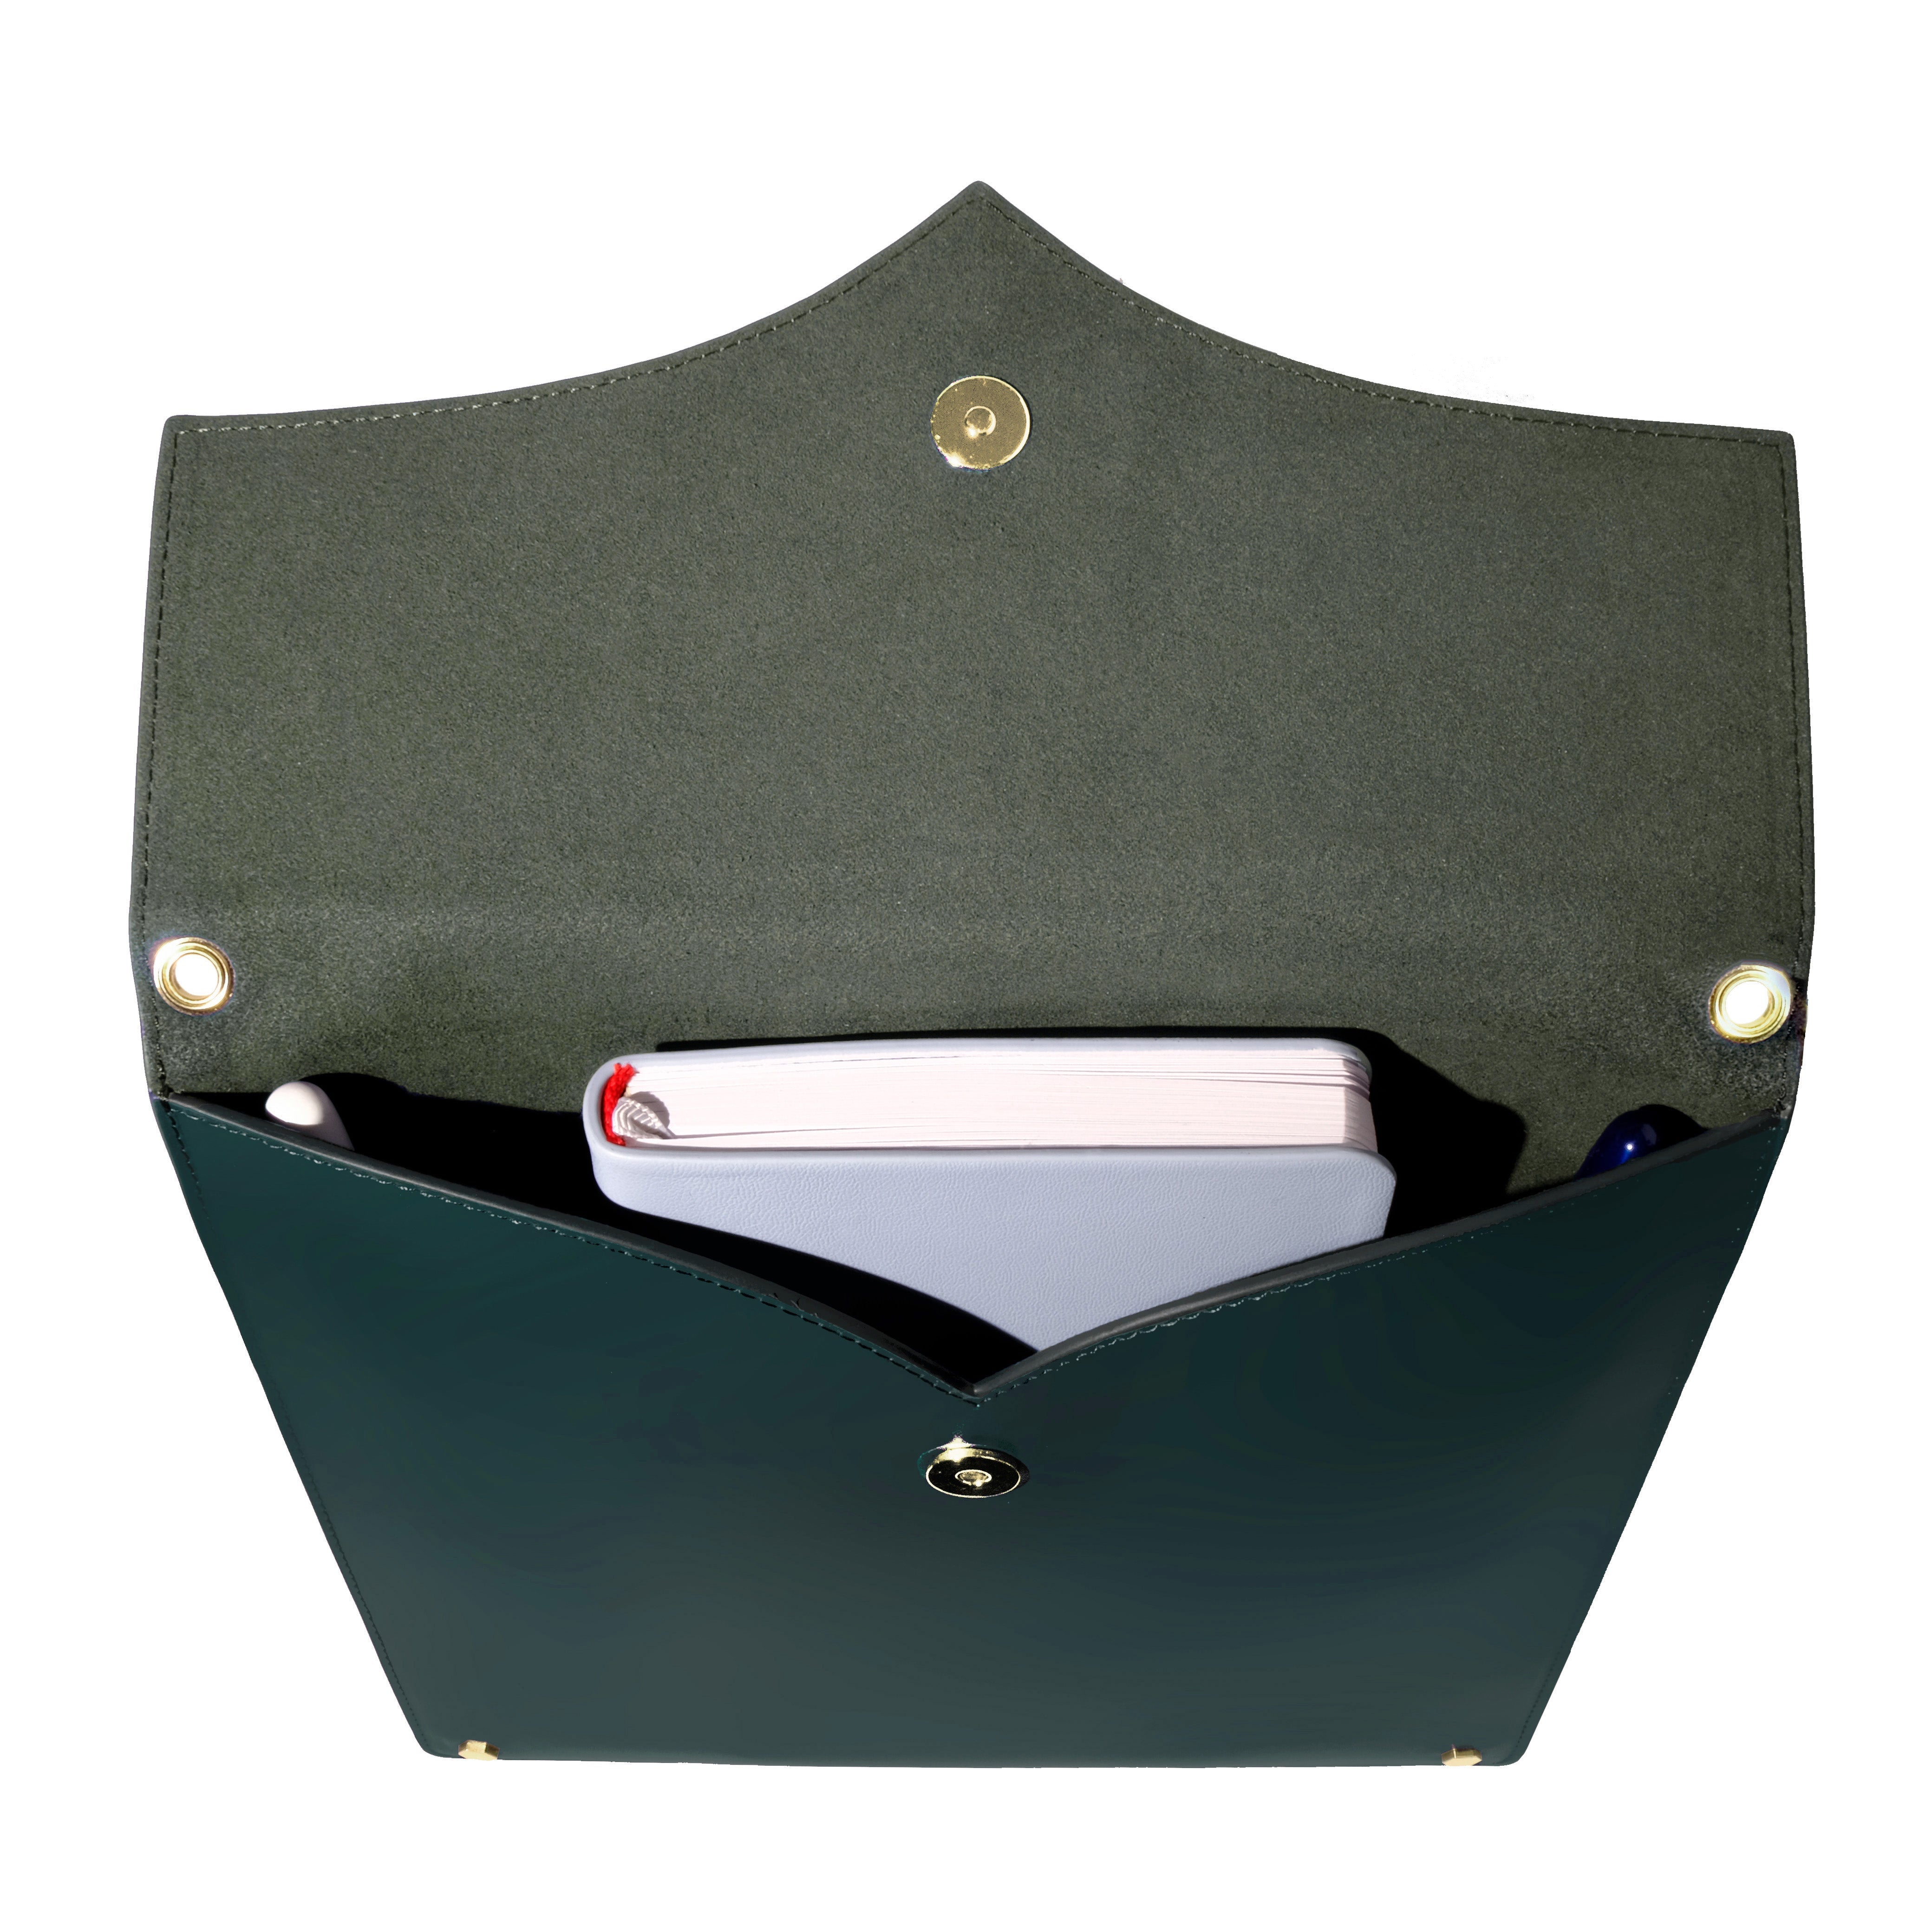 Leather Stationery Collection - The Pendant Folio A5 / Deep Teal